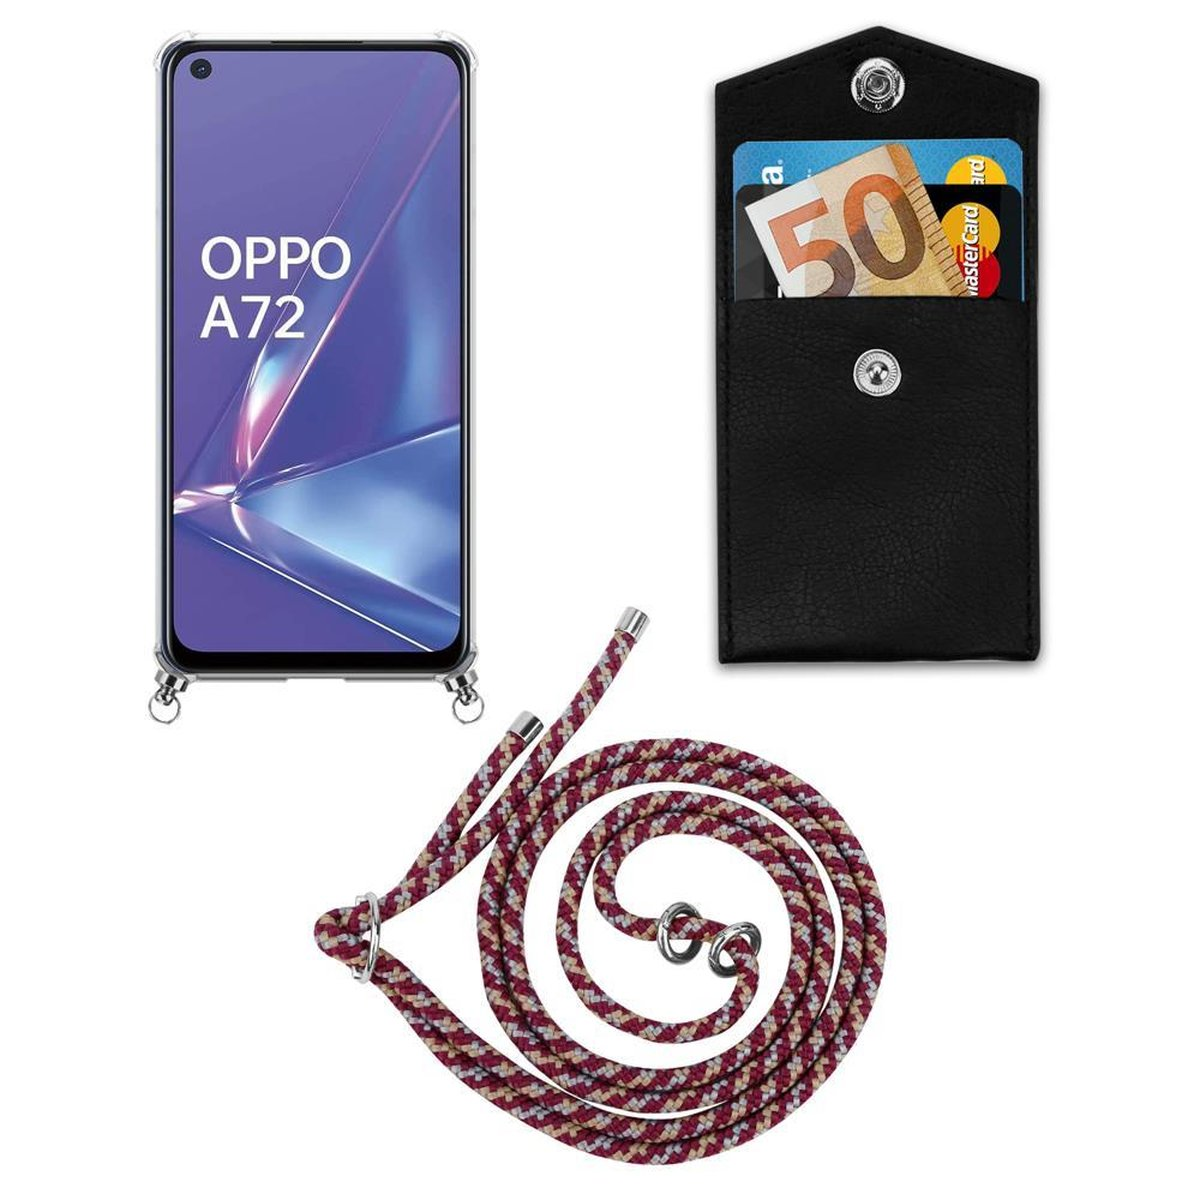 mit Kordel ROT CADORABO GELB und Hülle, Oppo, A92, abnehmbarer Band Backcover, Silber Kette WEIß Handy Ringen,